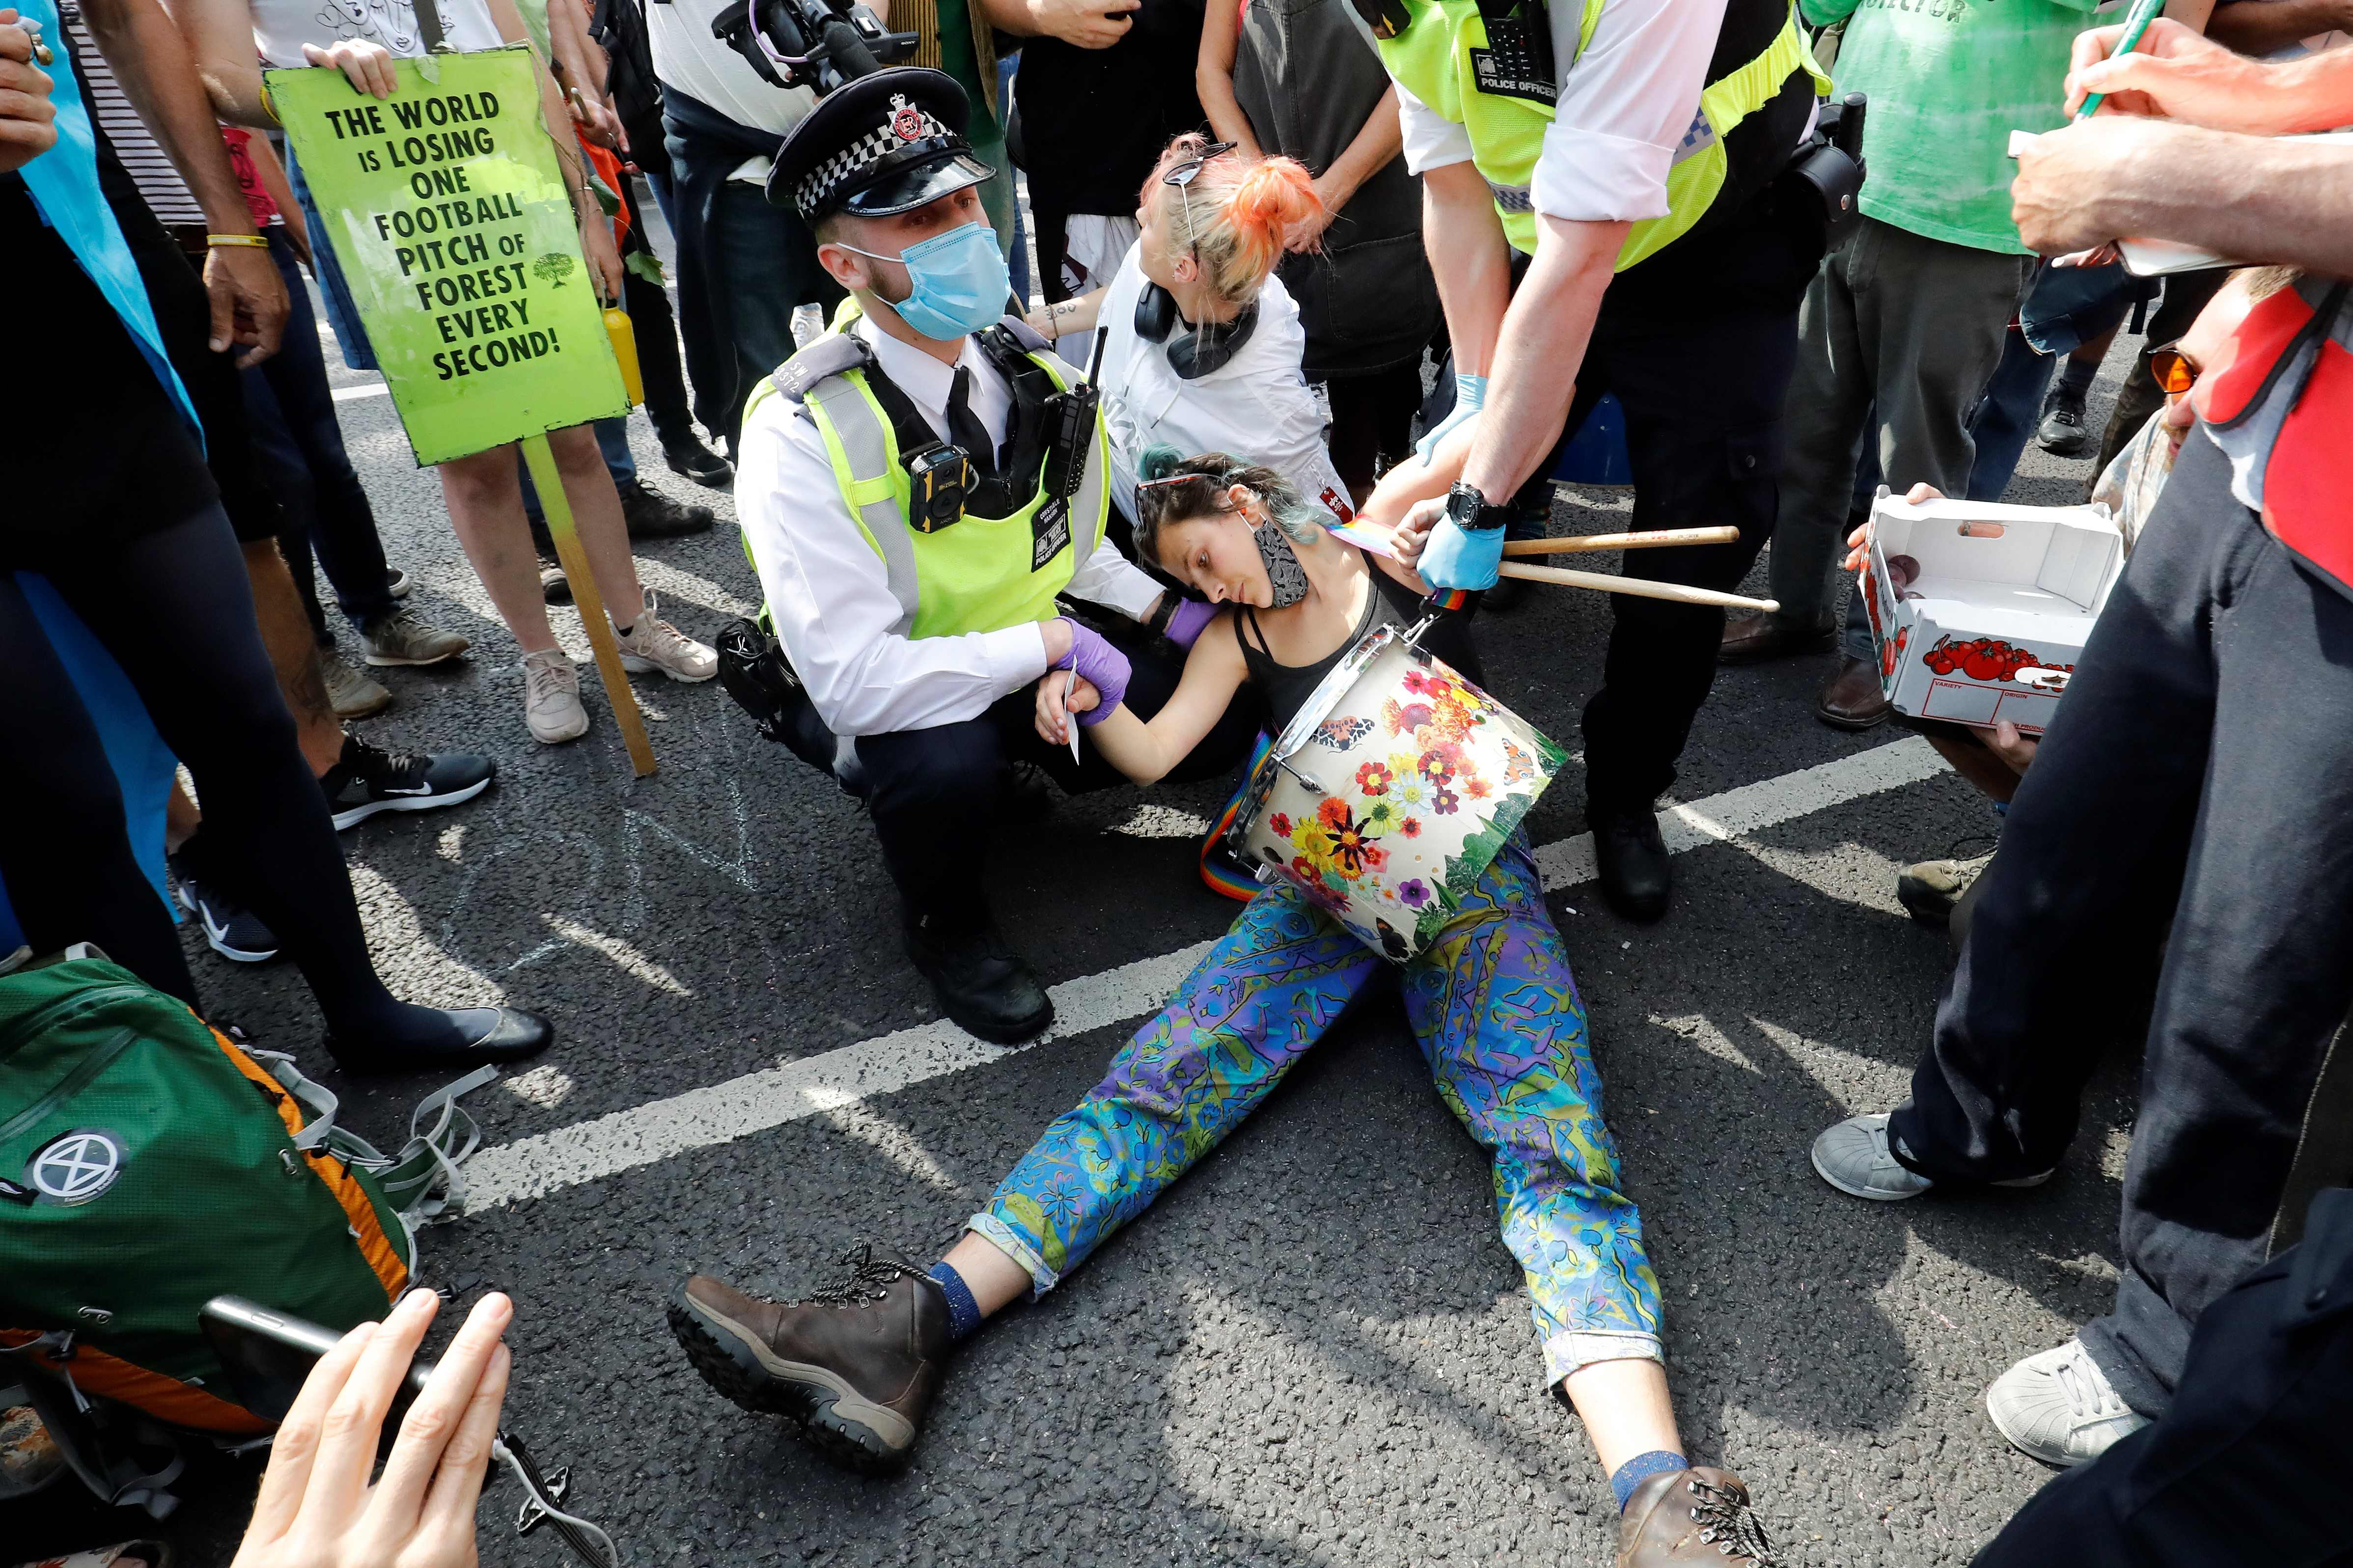 Police officers wearing face masks and gloves due to the COVID-19 pandemic, detain an activist from the climate protest group Extinction Rebellion as they demonstrate in Parliament Square in London on September 2, 2020, on the second day of their latest season of "mass rebellions"